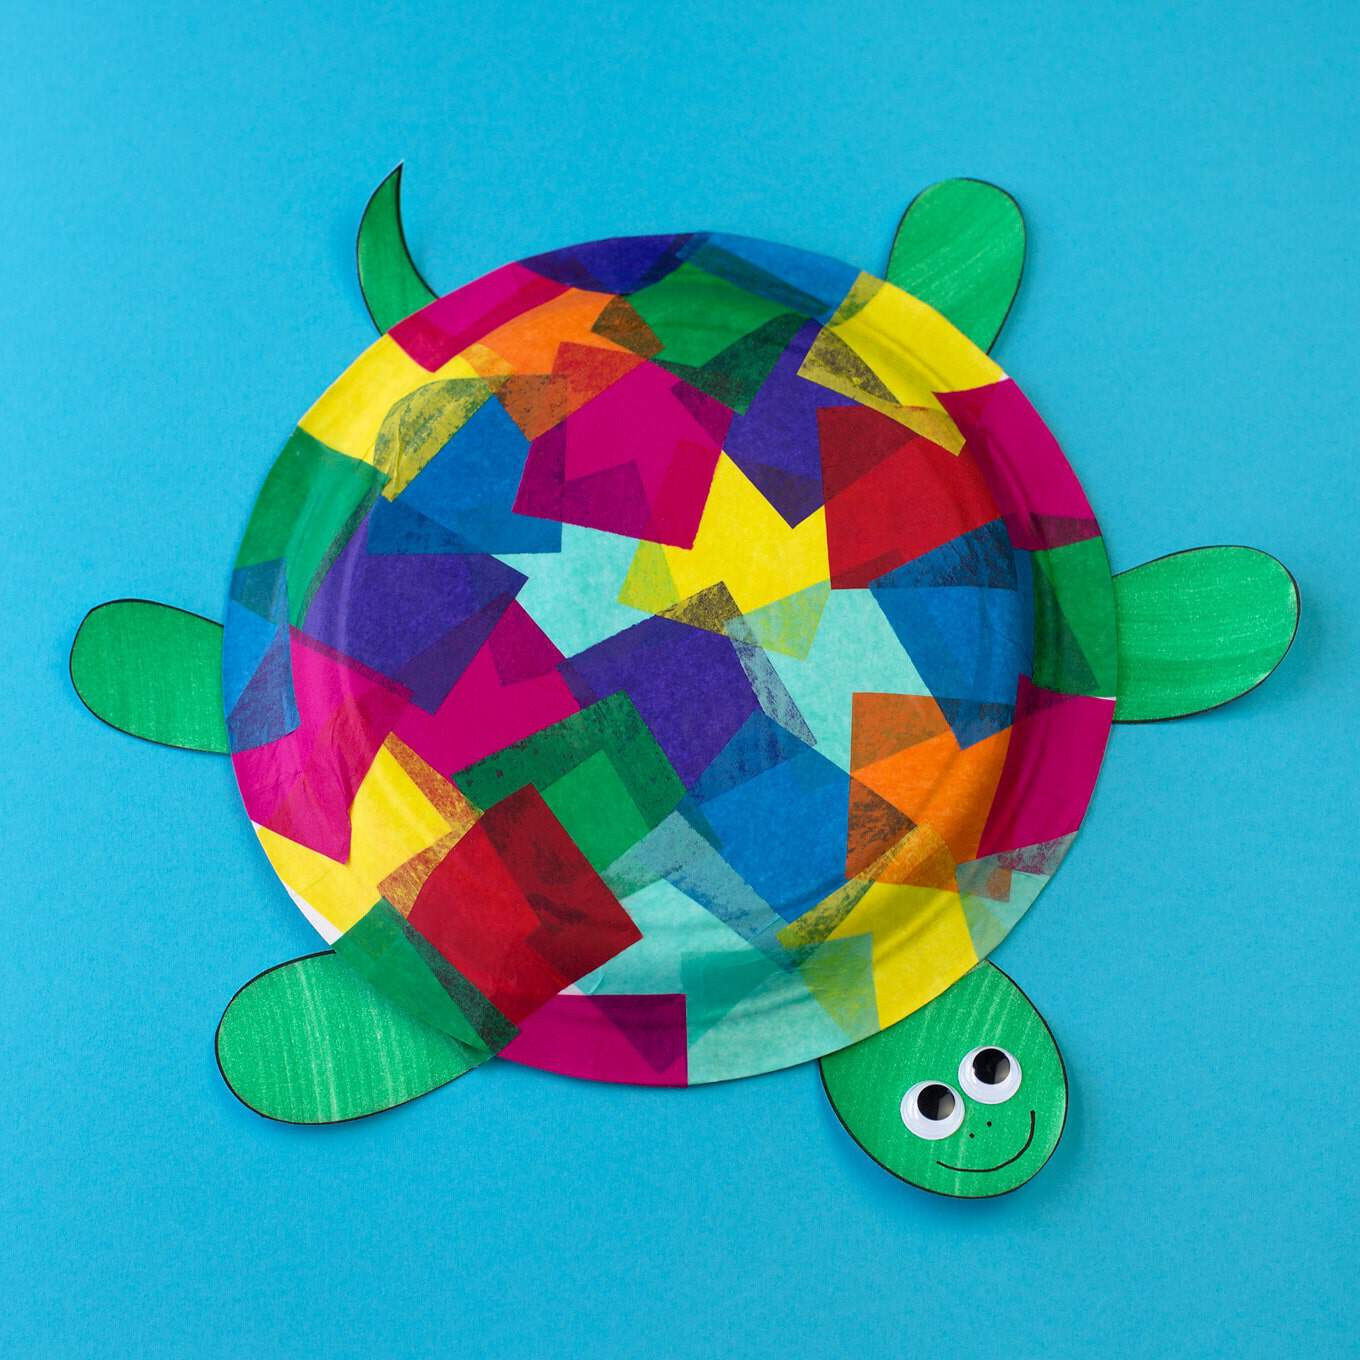 Easy Crafts For Toddlers
 15 Interesting Crafts Made With Tissue Paper